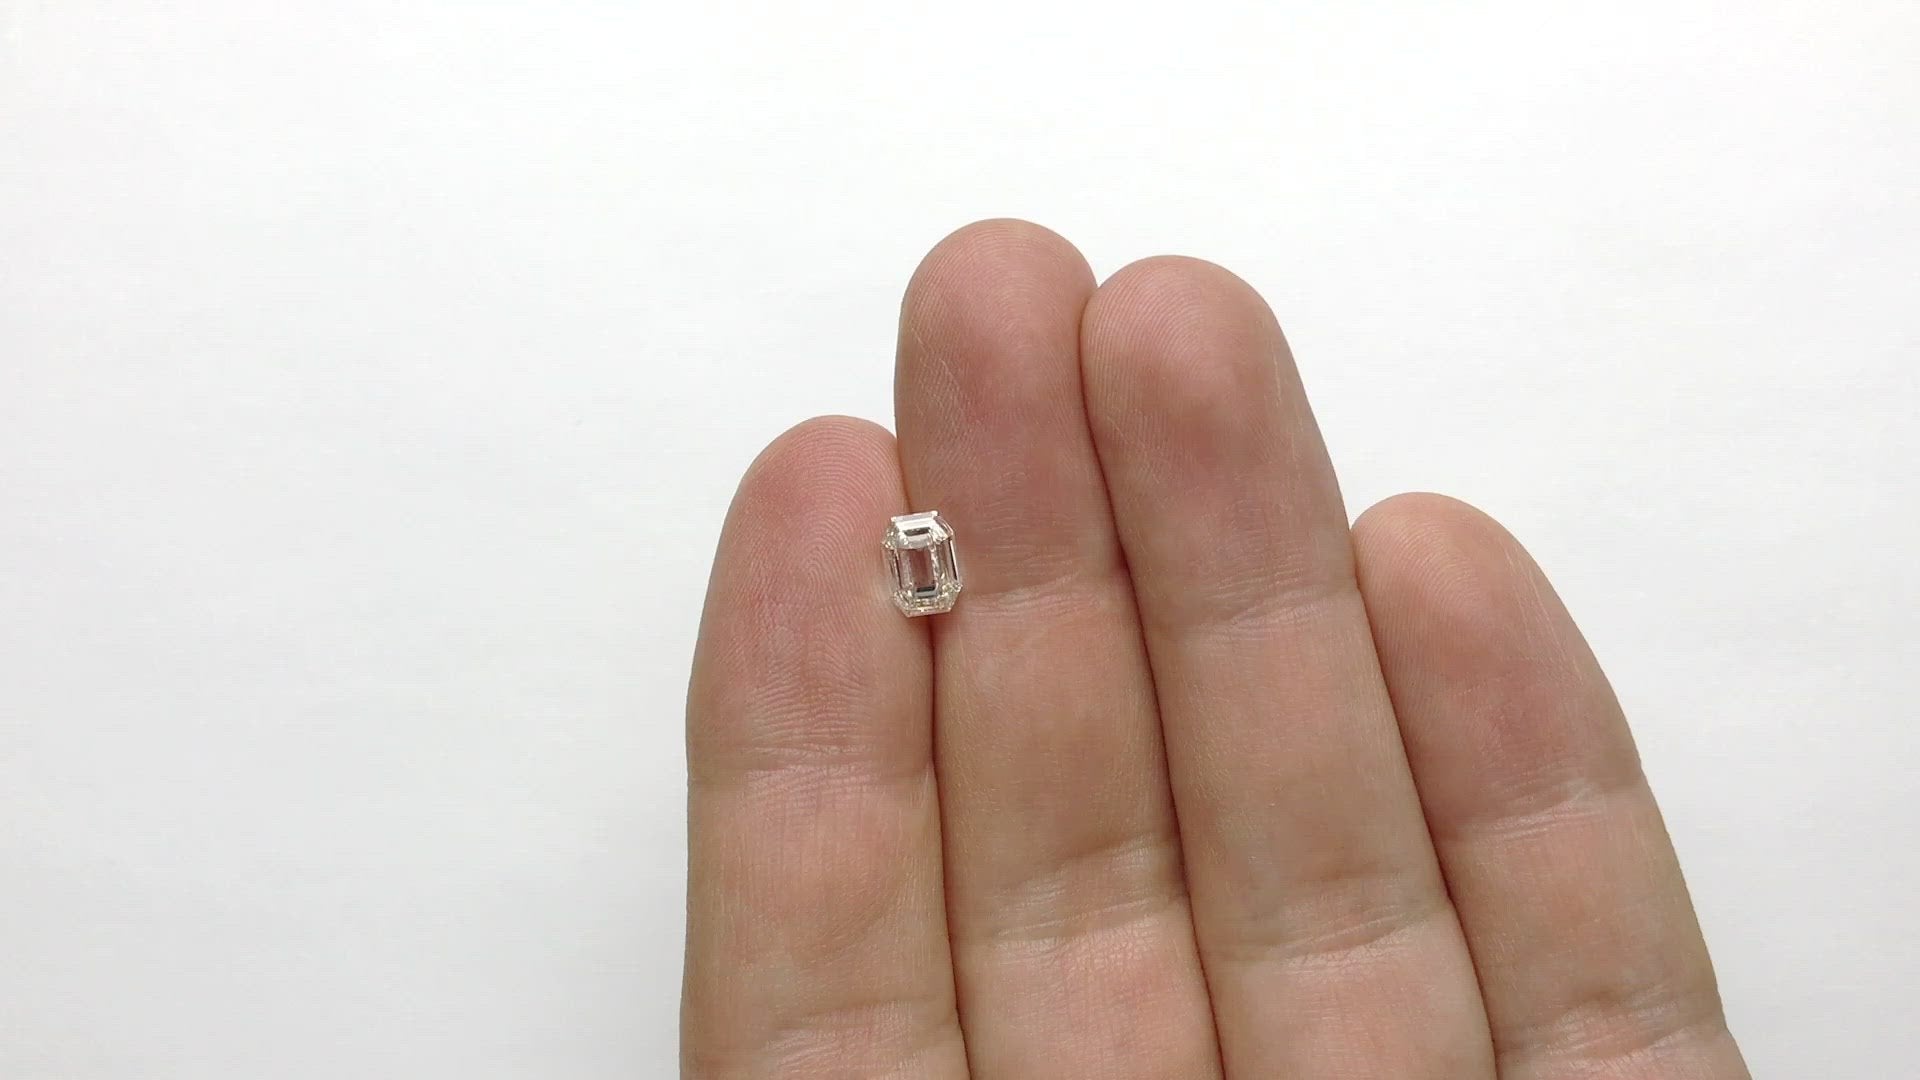 1.01ct GIA Certified VS2 G Color Emerald Cut Diamond for Custom Work - Inventory Code ECWG101